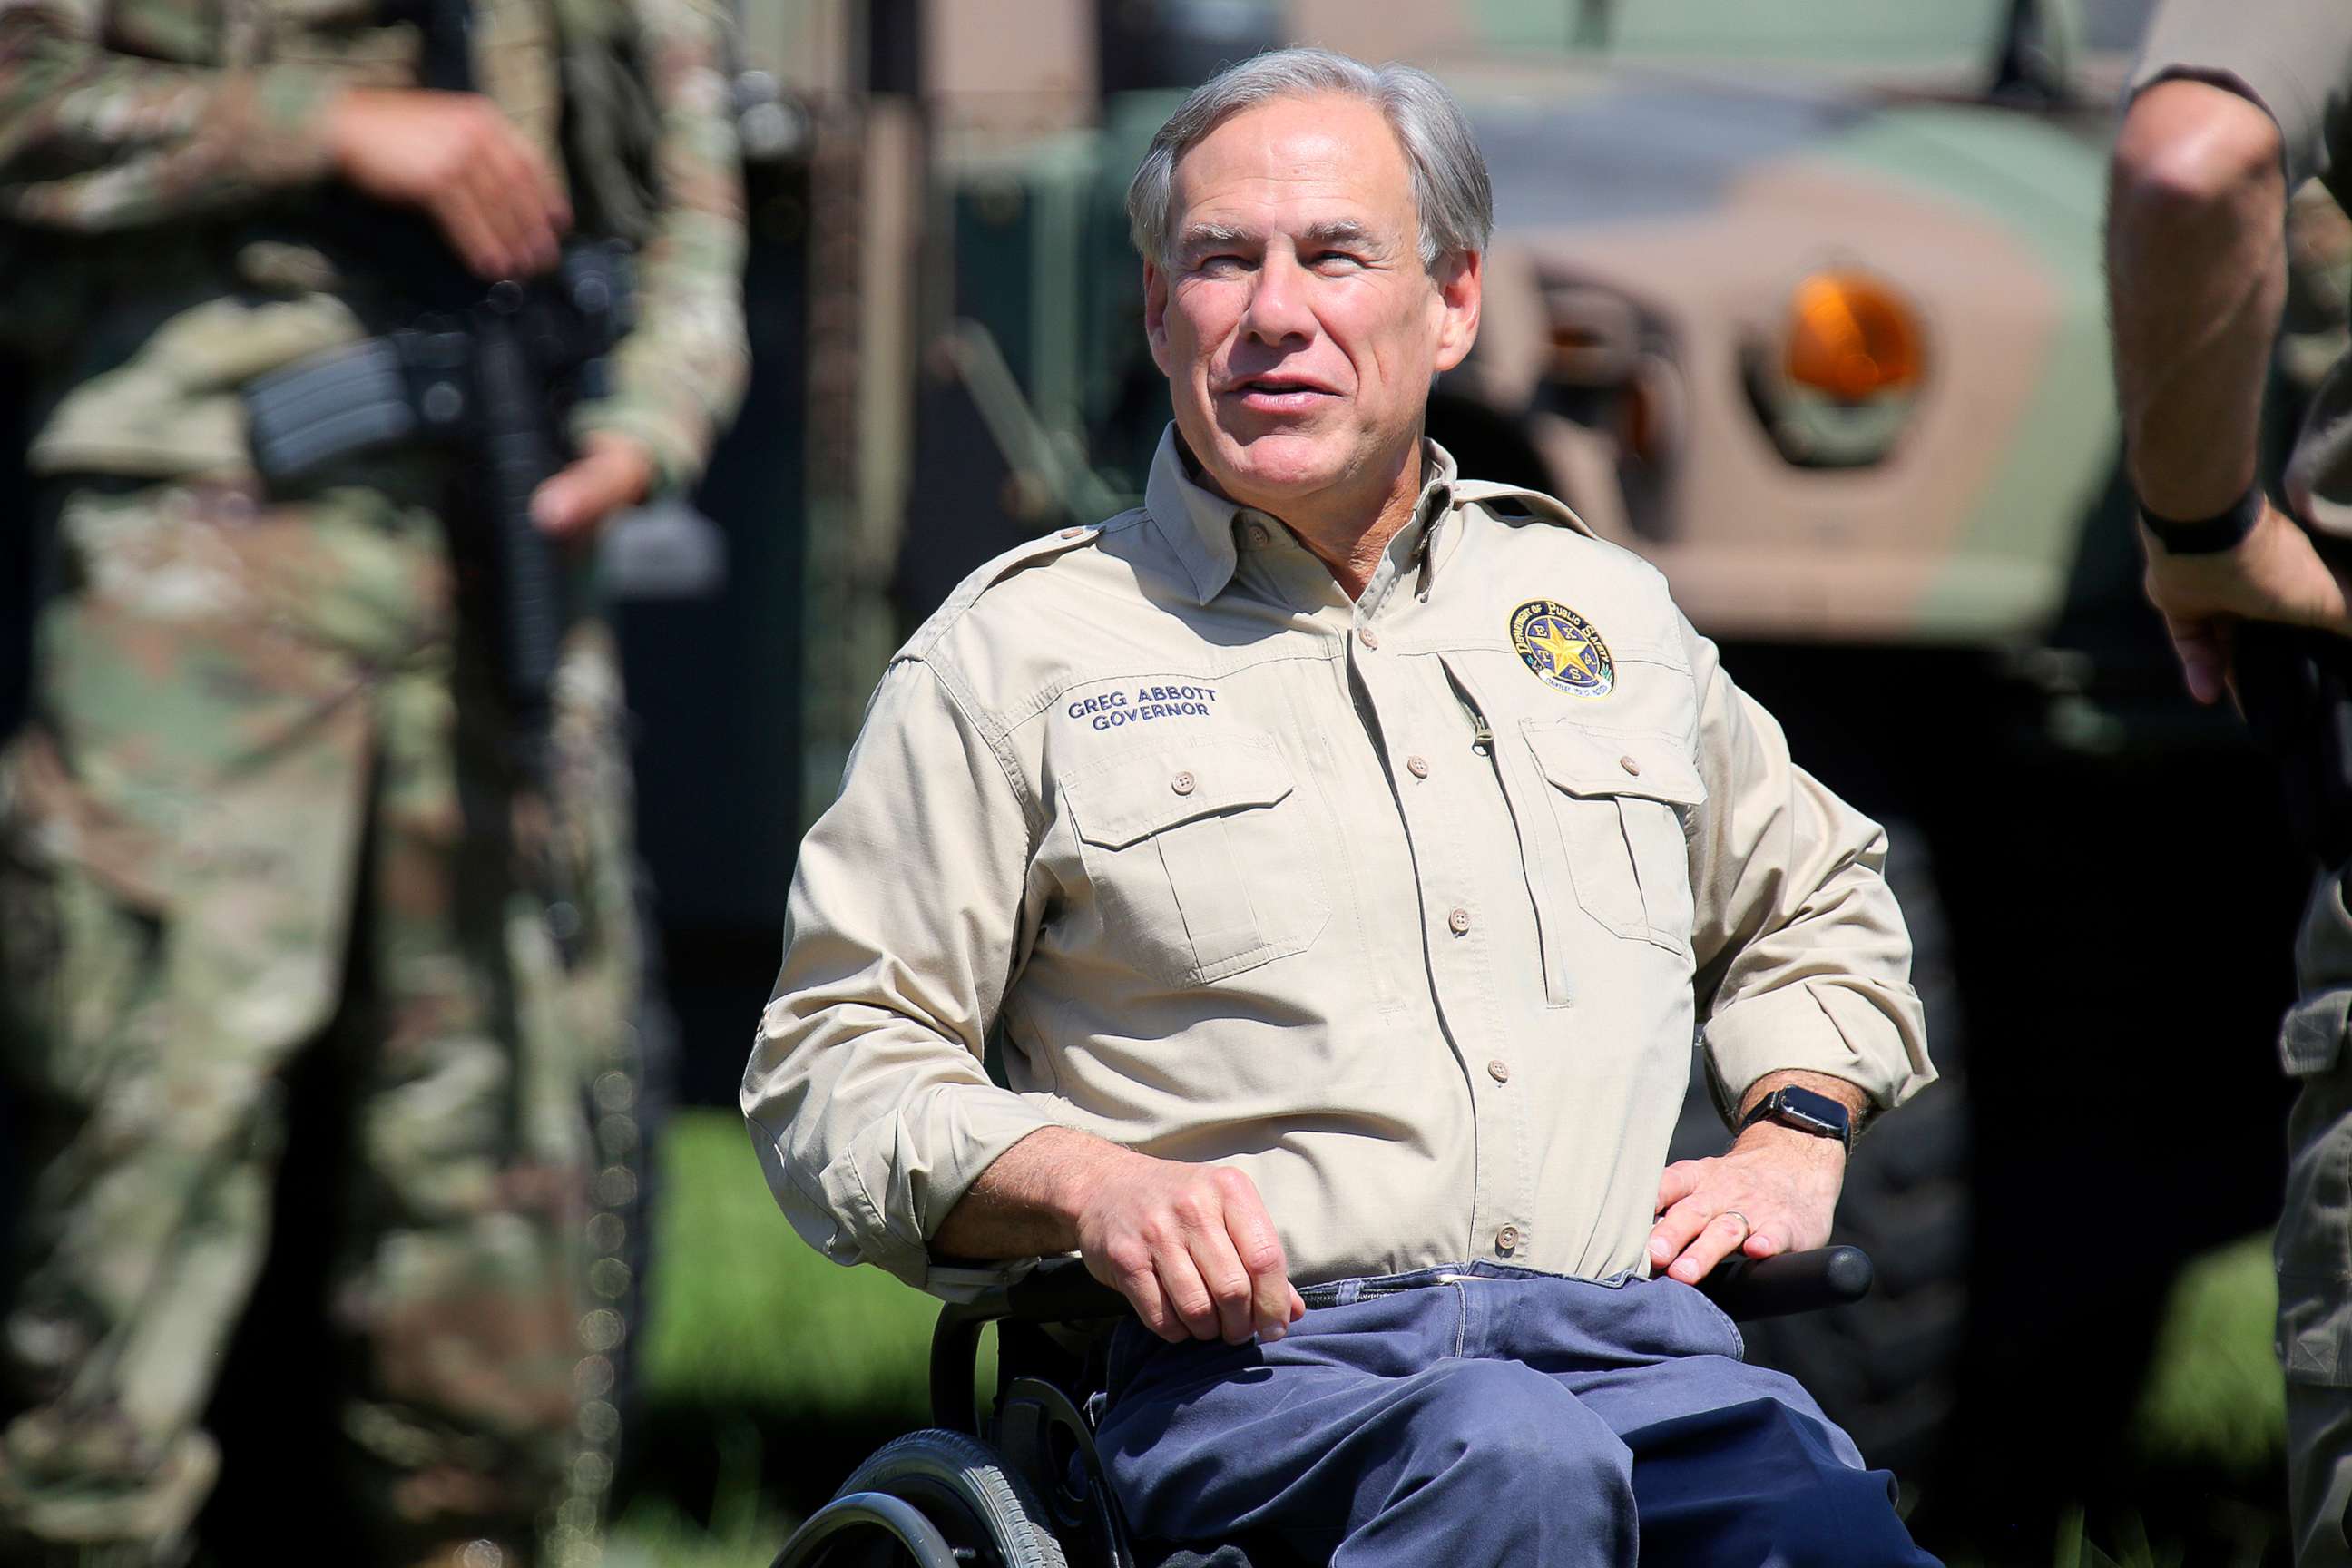 PHOTO: Texas Gov. Greg Abbott, joined by 10 other governors, arrives at a press conference at Anzalduas Park in Mission, Texas, Oct. 6, 2021.